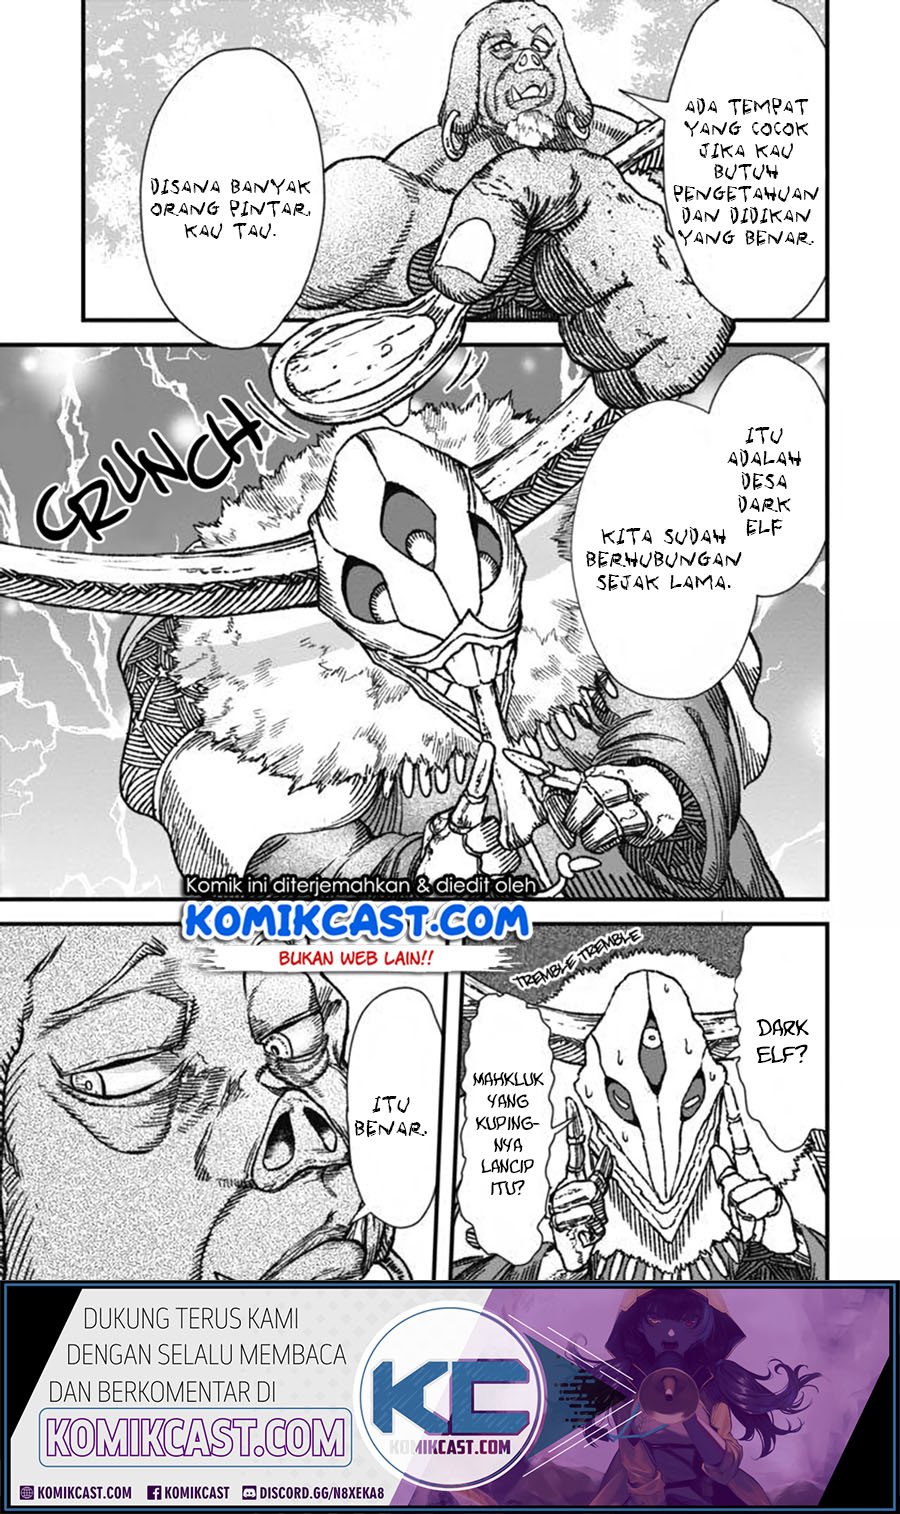 The Comeback of the Demon King Who Formed a Demon’s Guild After Being Vanquished by the Hero Chapter 03